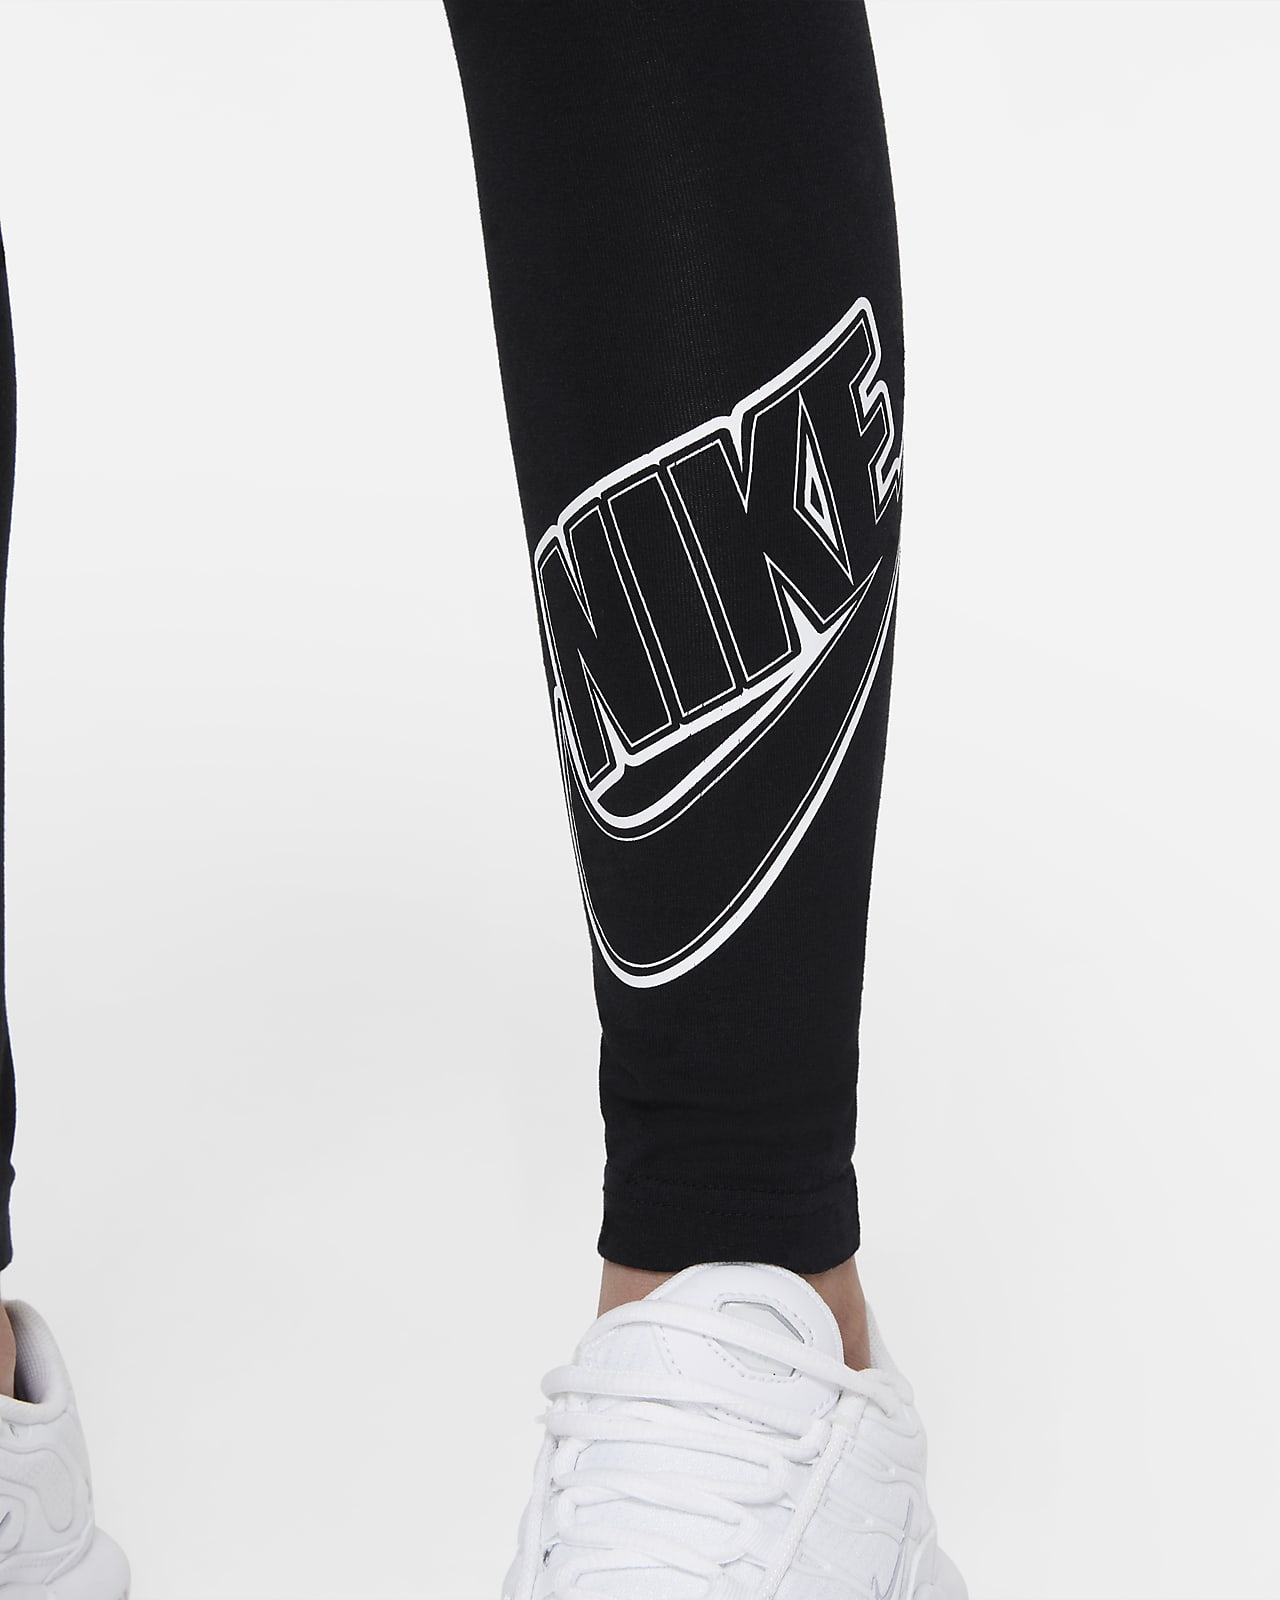  Nike NP Tights BV5642 010 Black/White, multicolor (black /  white) : Clothing, Shoes & Jewelry